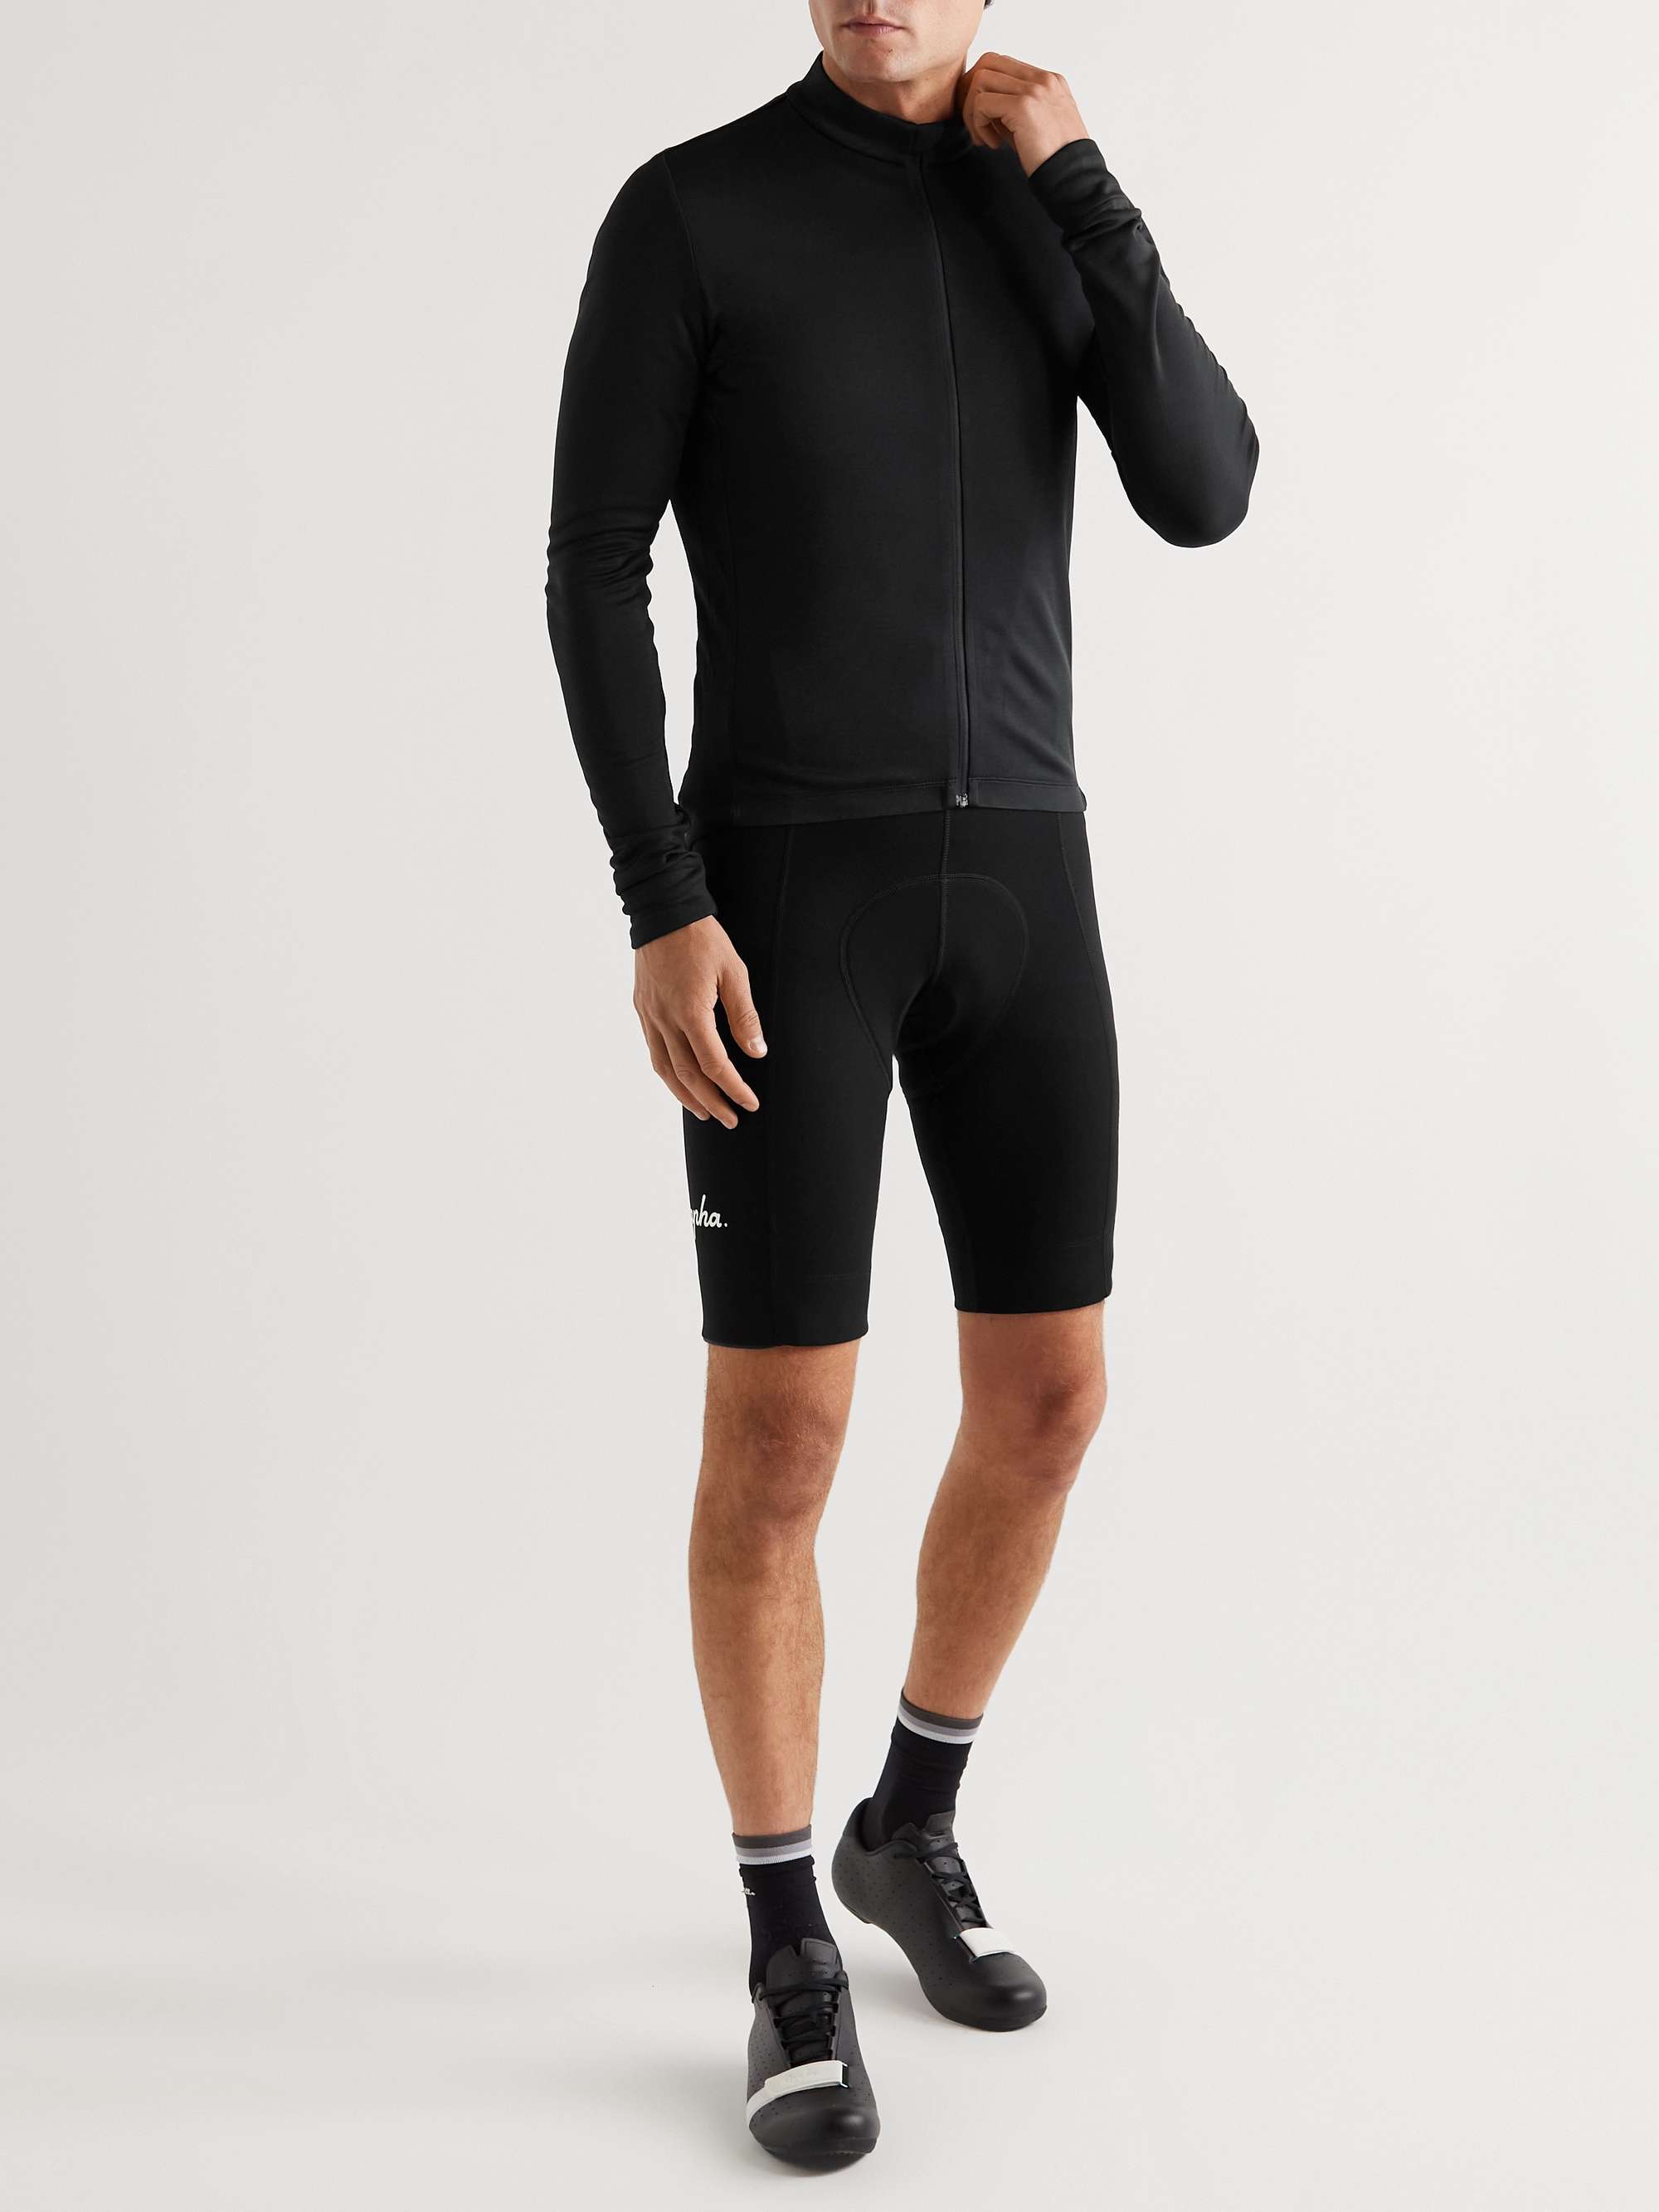 RAPHA Classic II Recycled Cycling Jersey